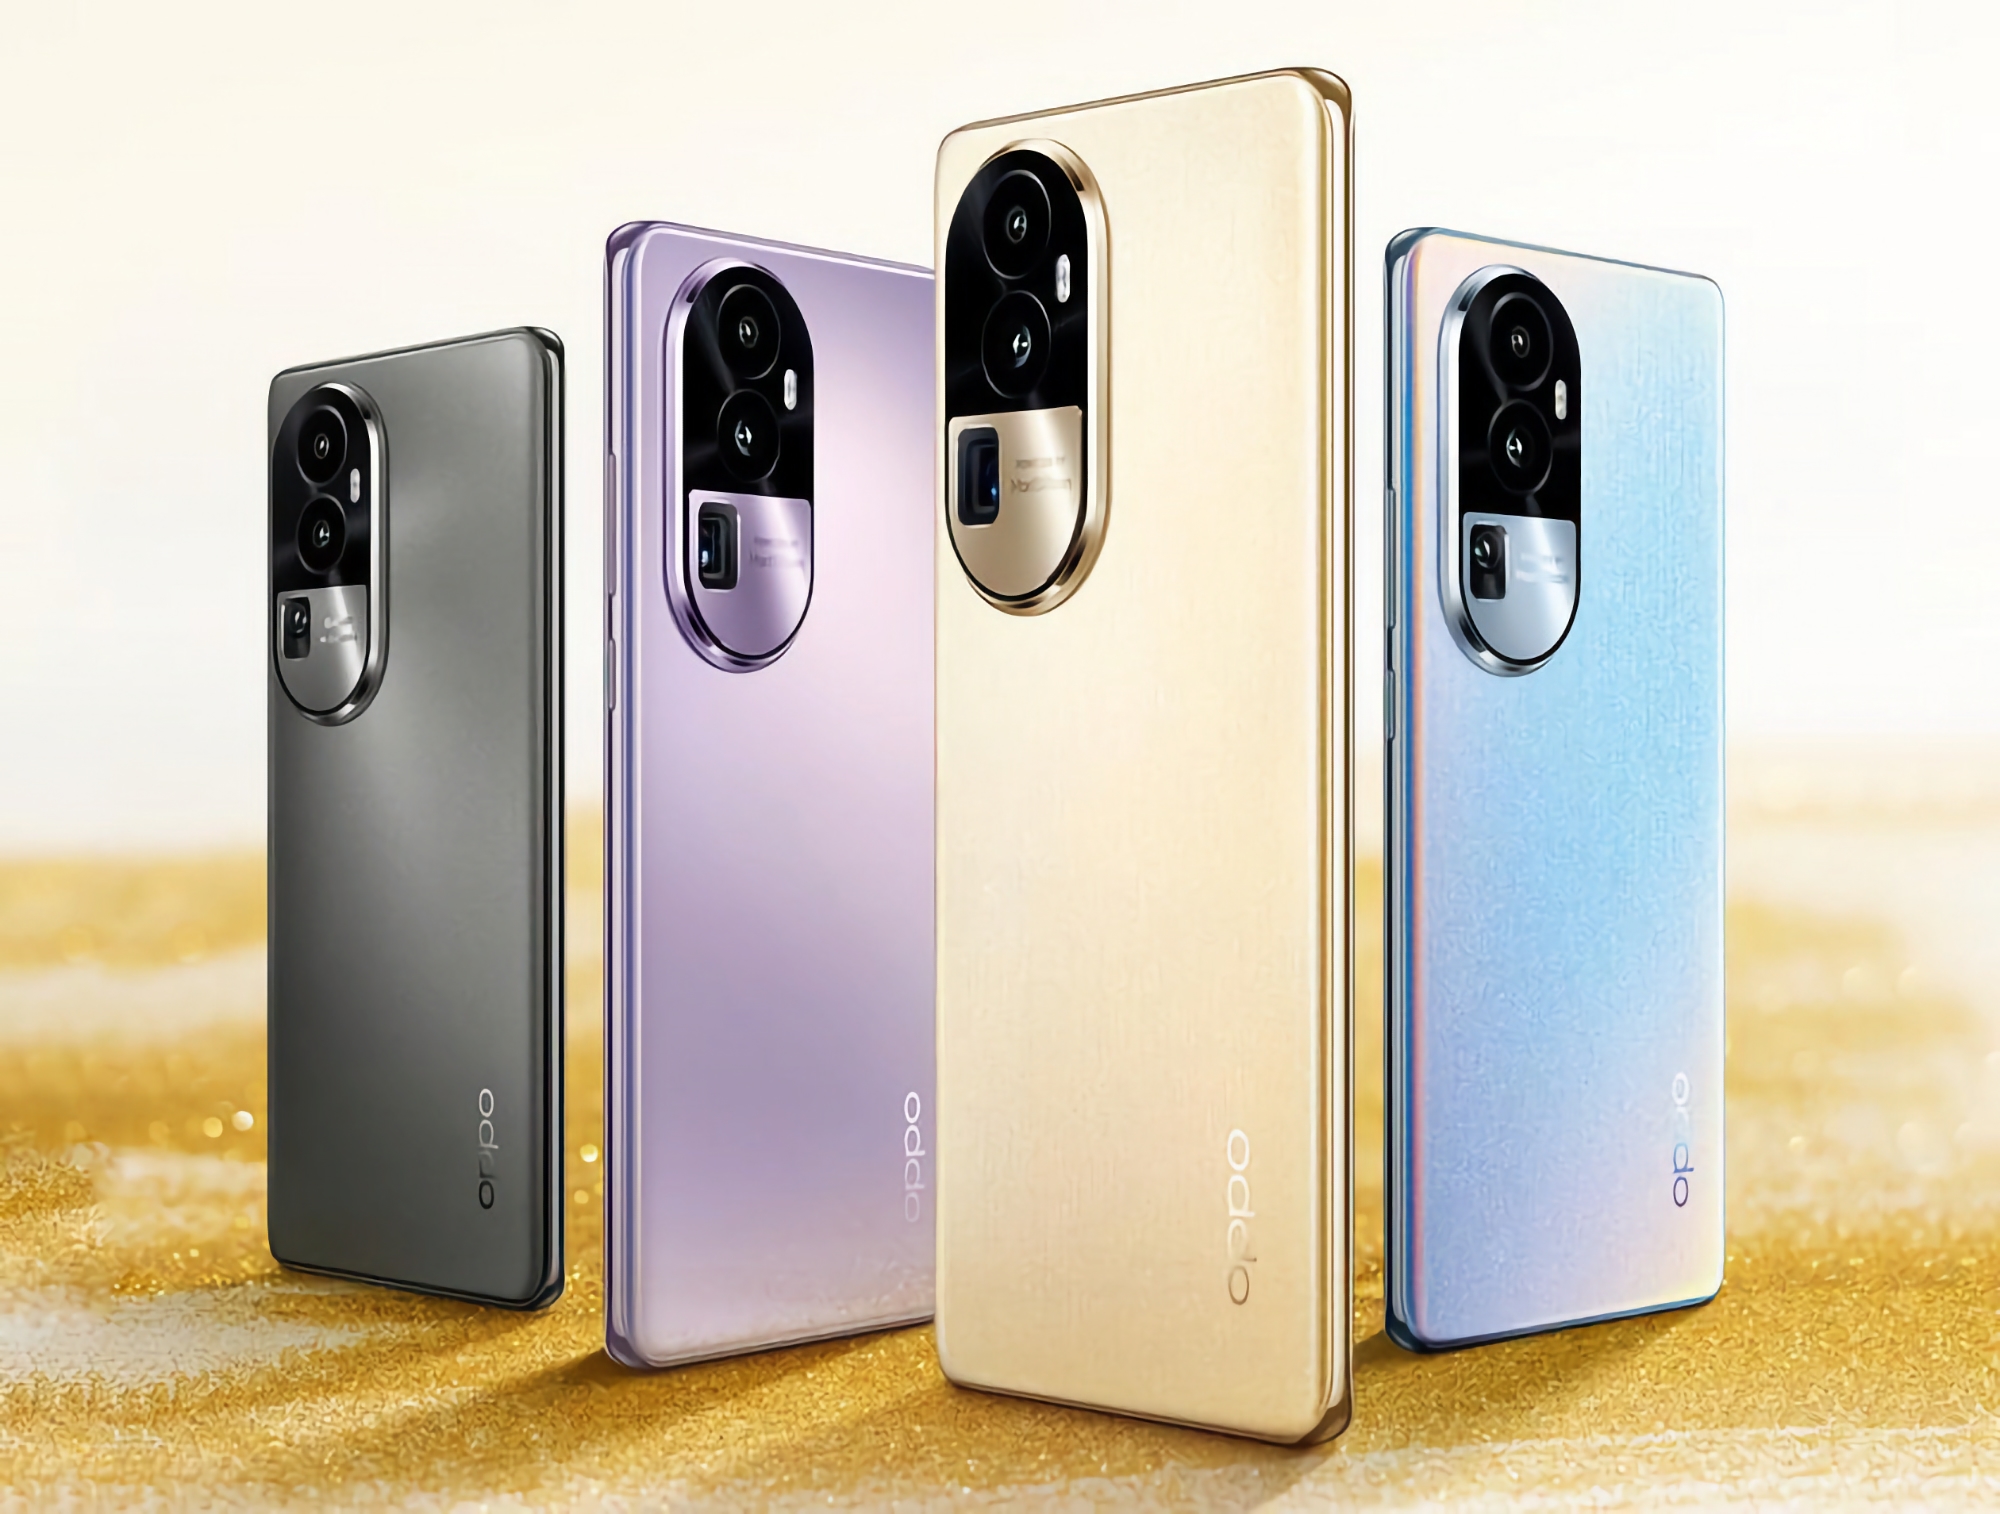 When the OPPO Reno 10, OPPO Reno 10 Pro and OPPO Reno 10 Pro+ smartphones will be launched in Europe